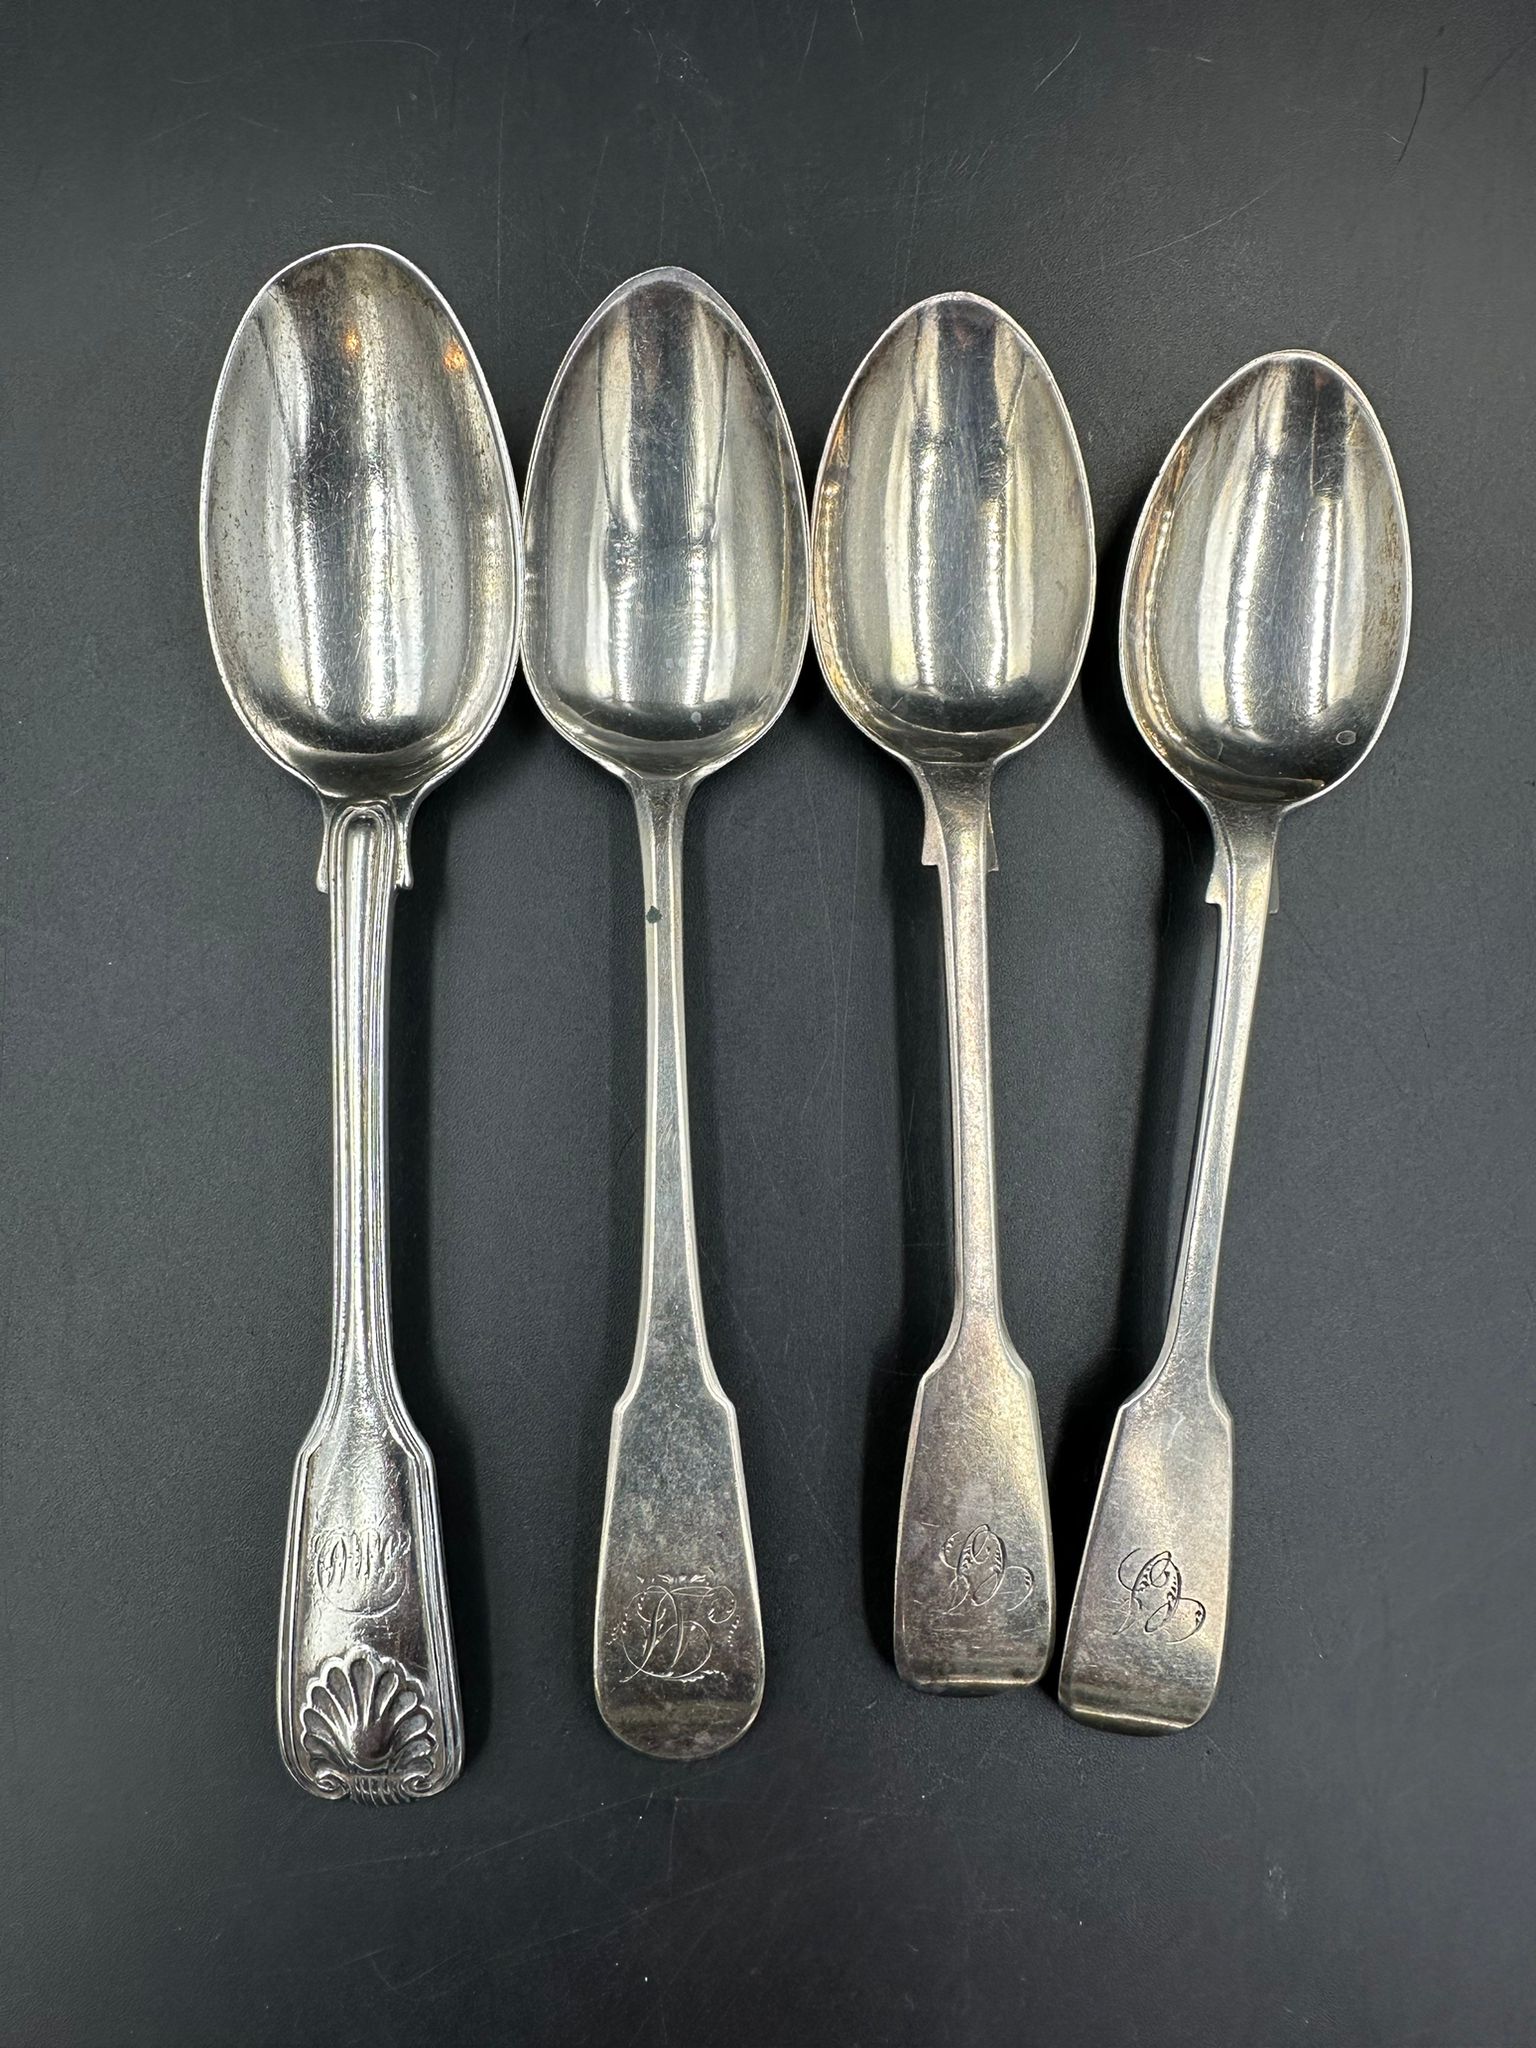 Four Victorian silver teaspoons,hallmarked for London 1883 by Holland, Son & Slater